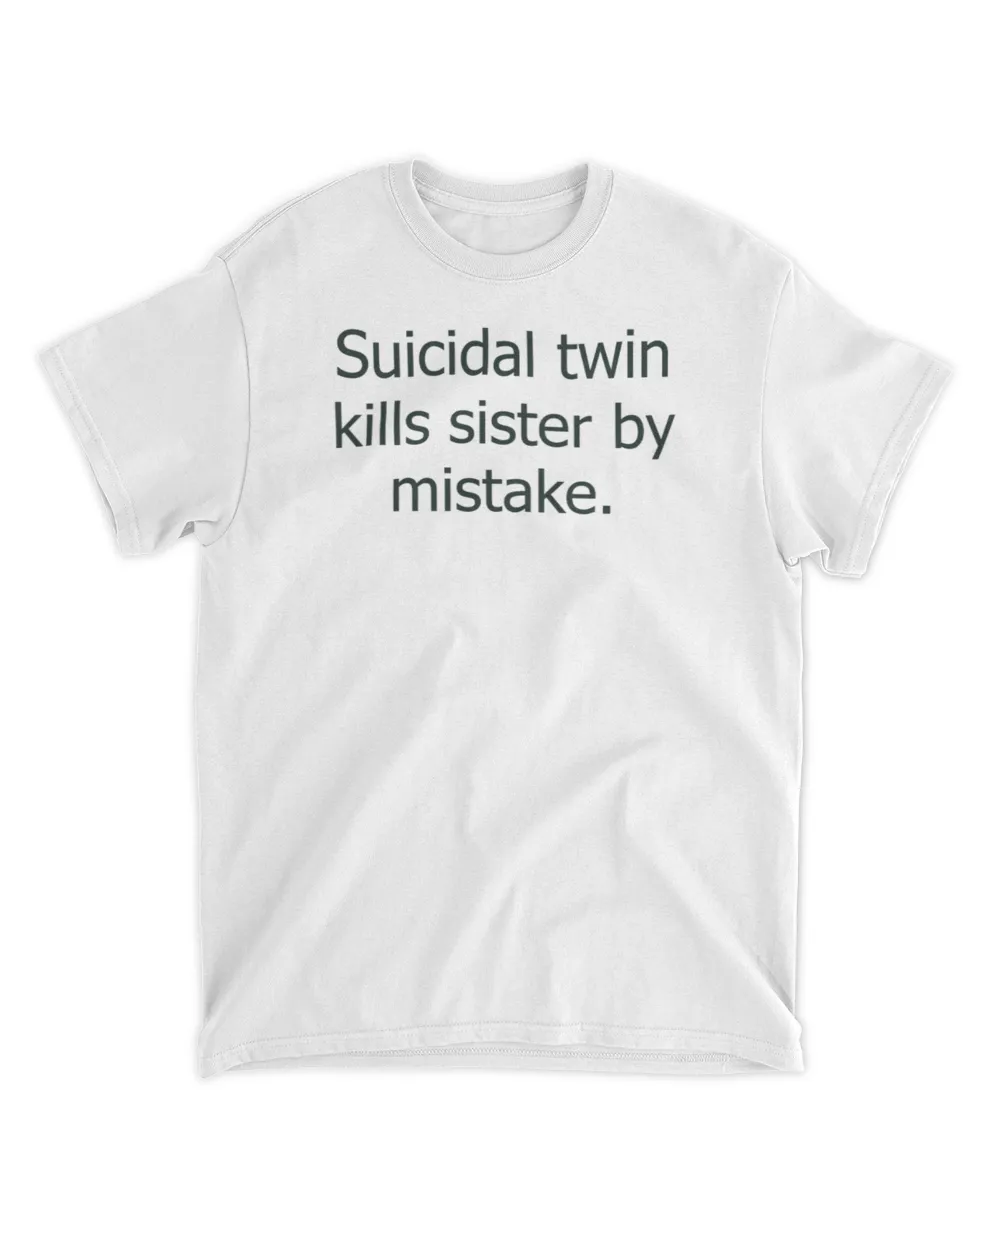  Suicidal twin kills sister by mistake shirt